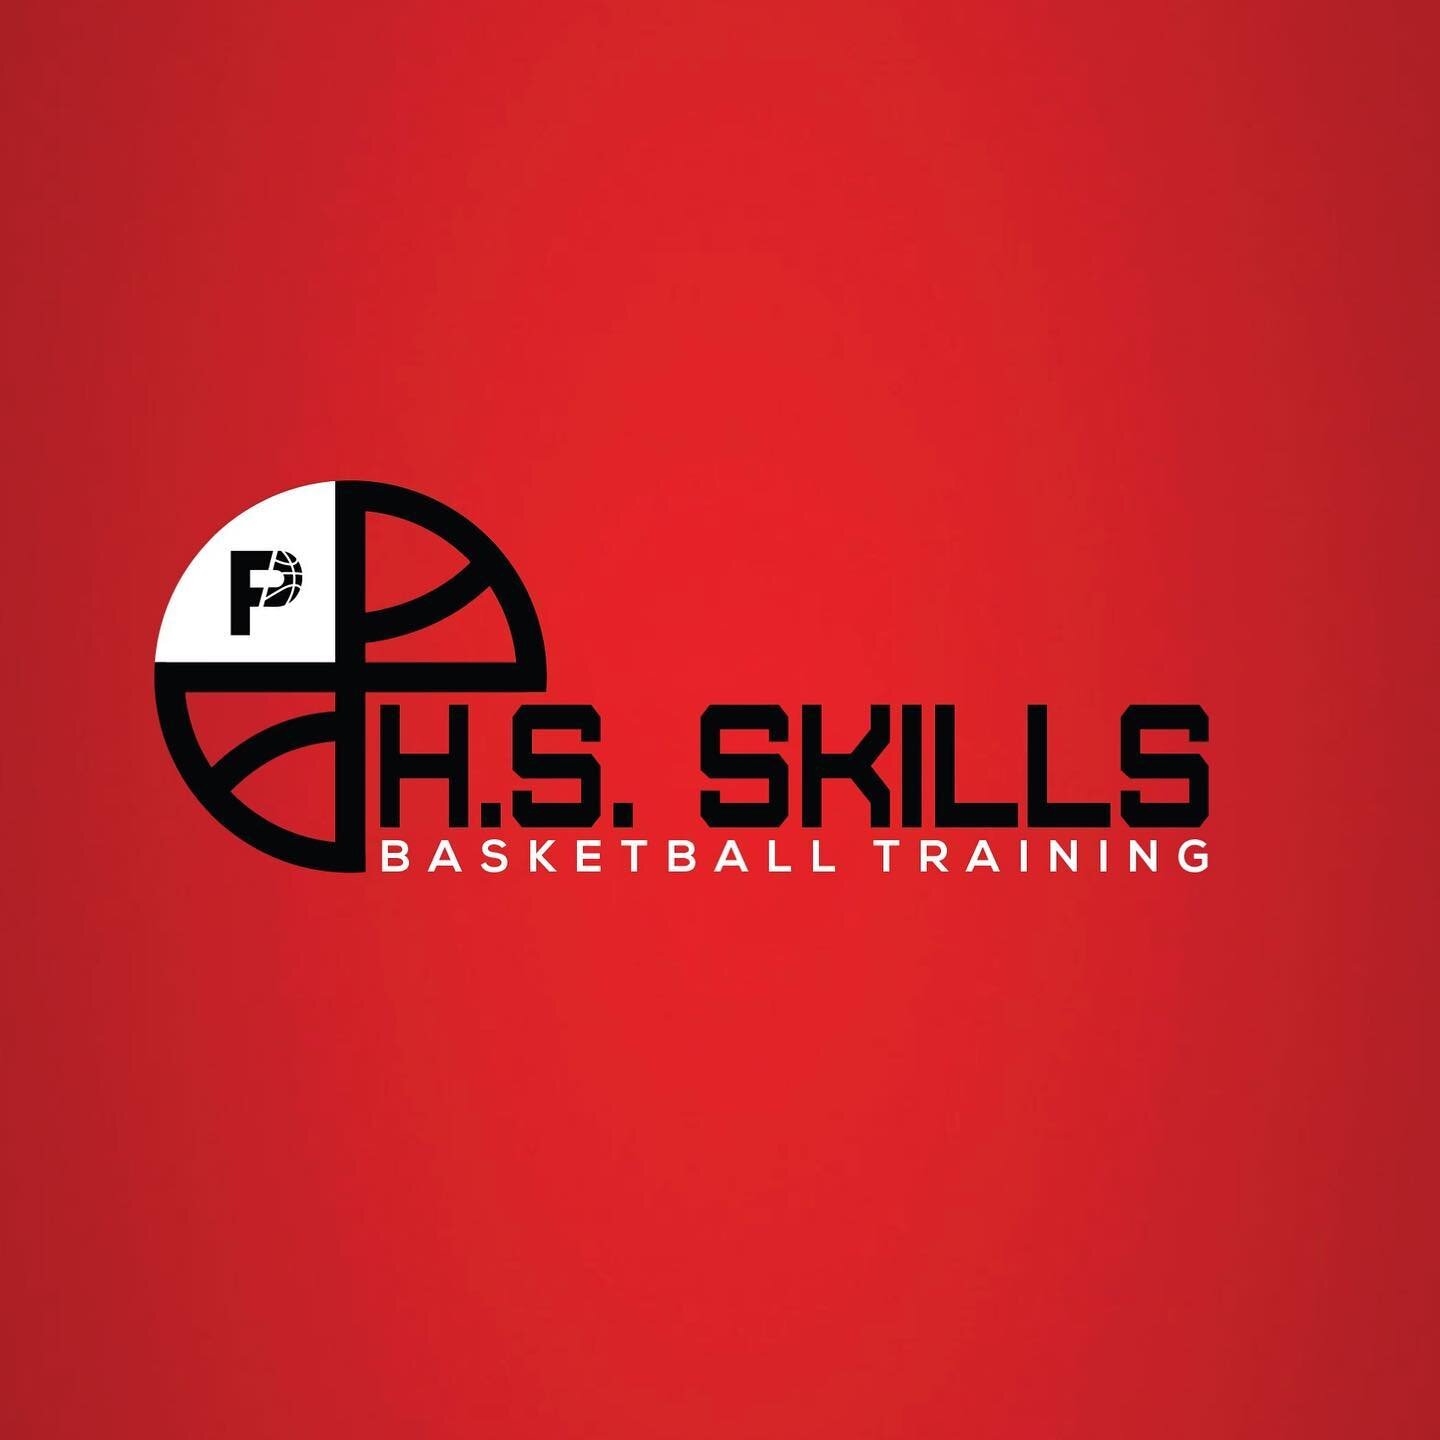 H.S. Skills circuits are now open! 

Come ready to improve your game!
Register at ThePracticeFacility.com
Link in bio!